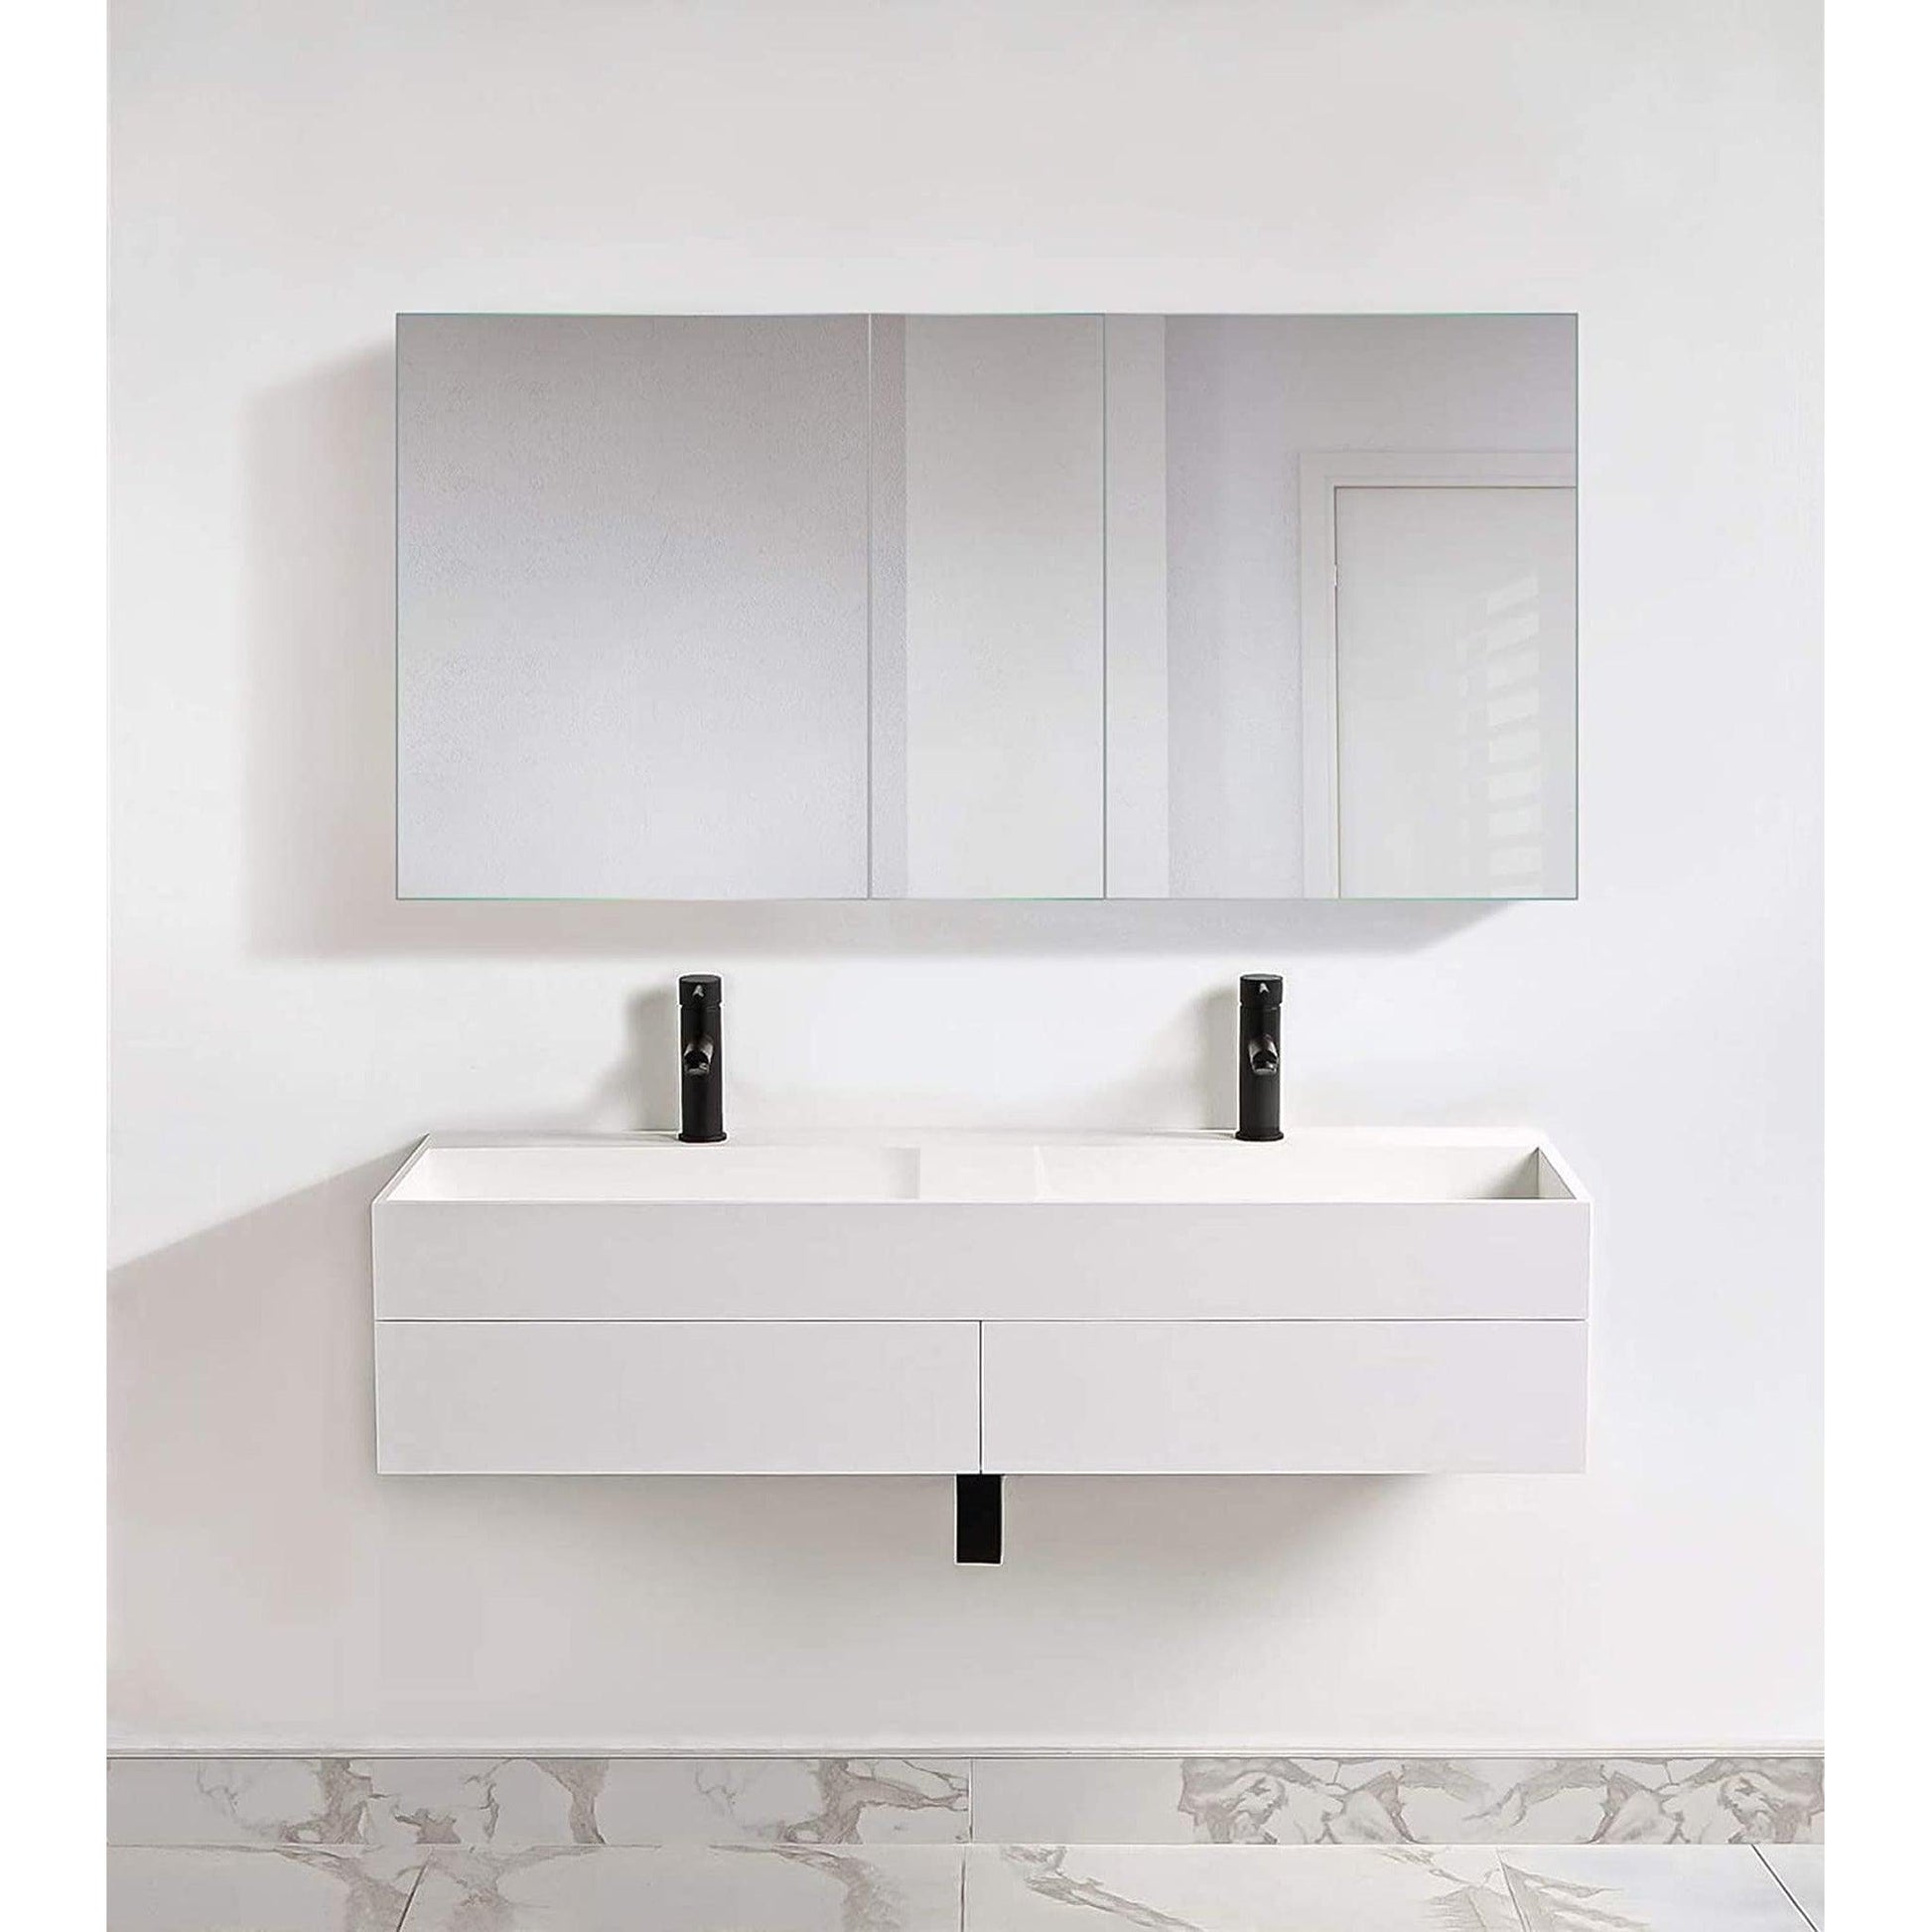 Krugg Reflections Plaza 60" x 30" Tri-View Left-Right-Right Opening Rectangular Recessed/Surface-Mount Medicine Cabinet Mirror